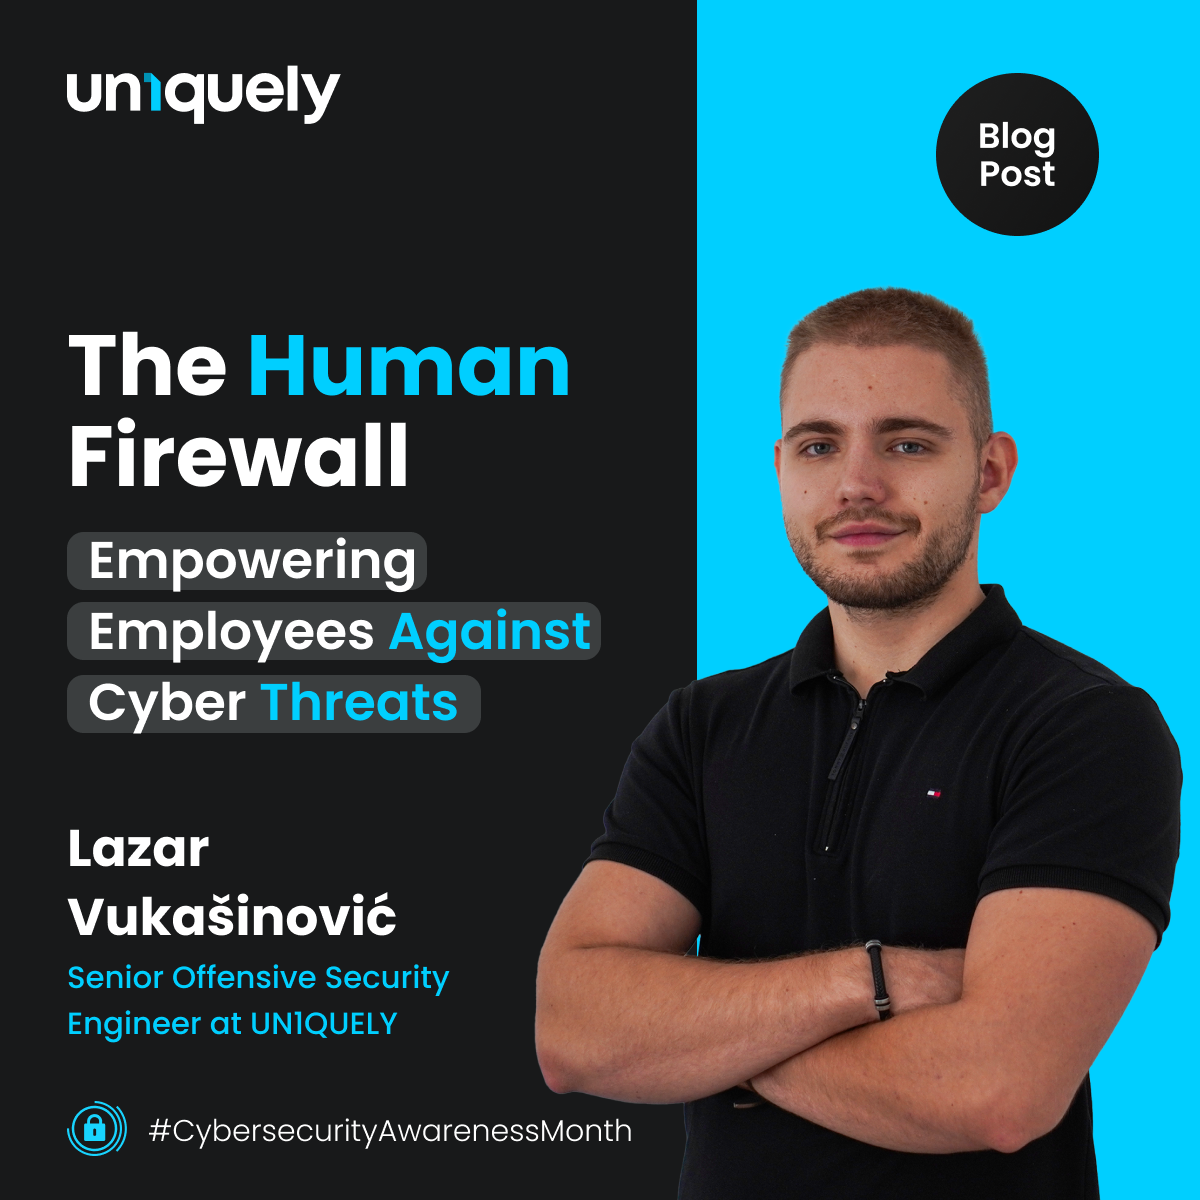 New UN1QUELY blog post with title The Human Firewall: Empowering employees againts cyber threats by Layar Vukašinović who is on the photo